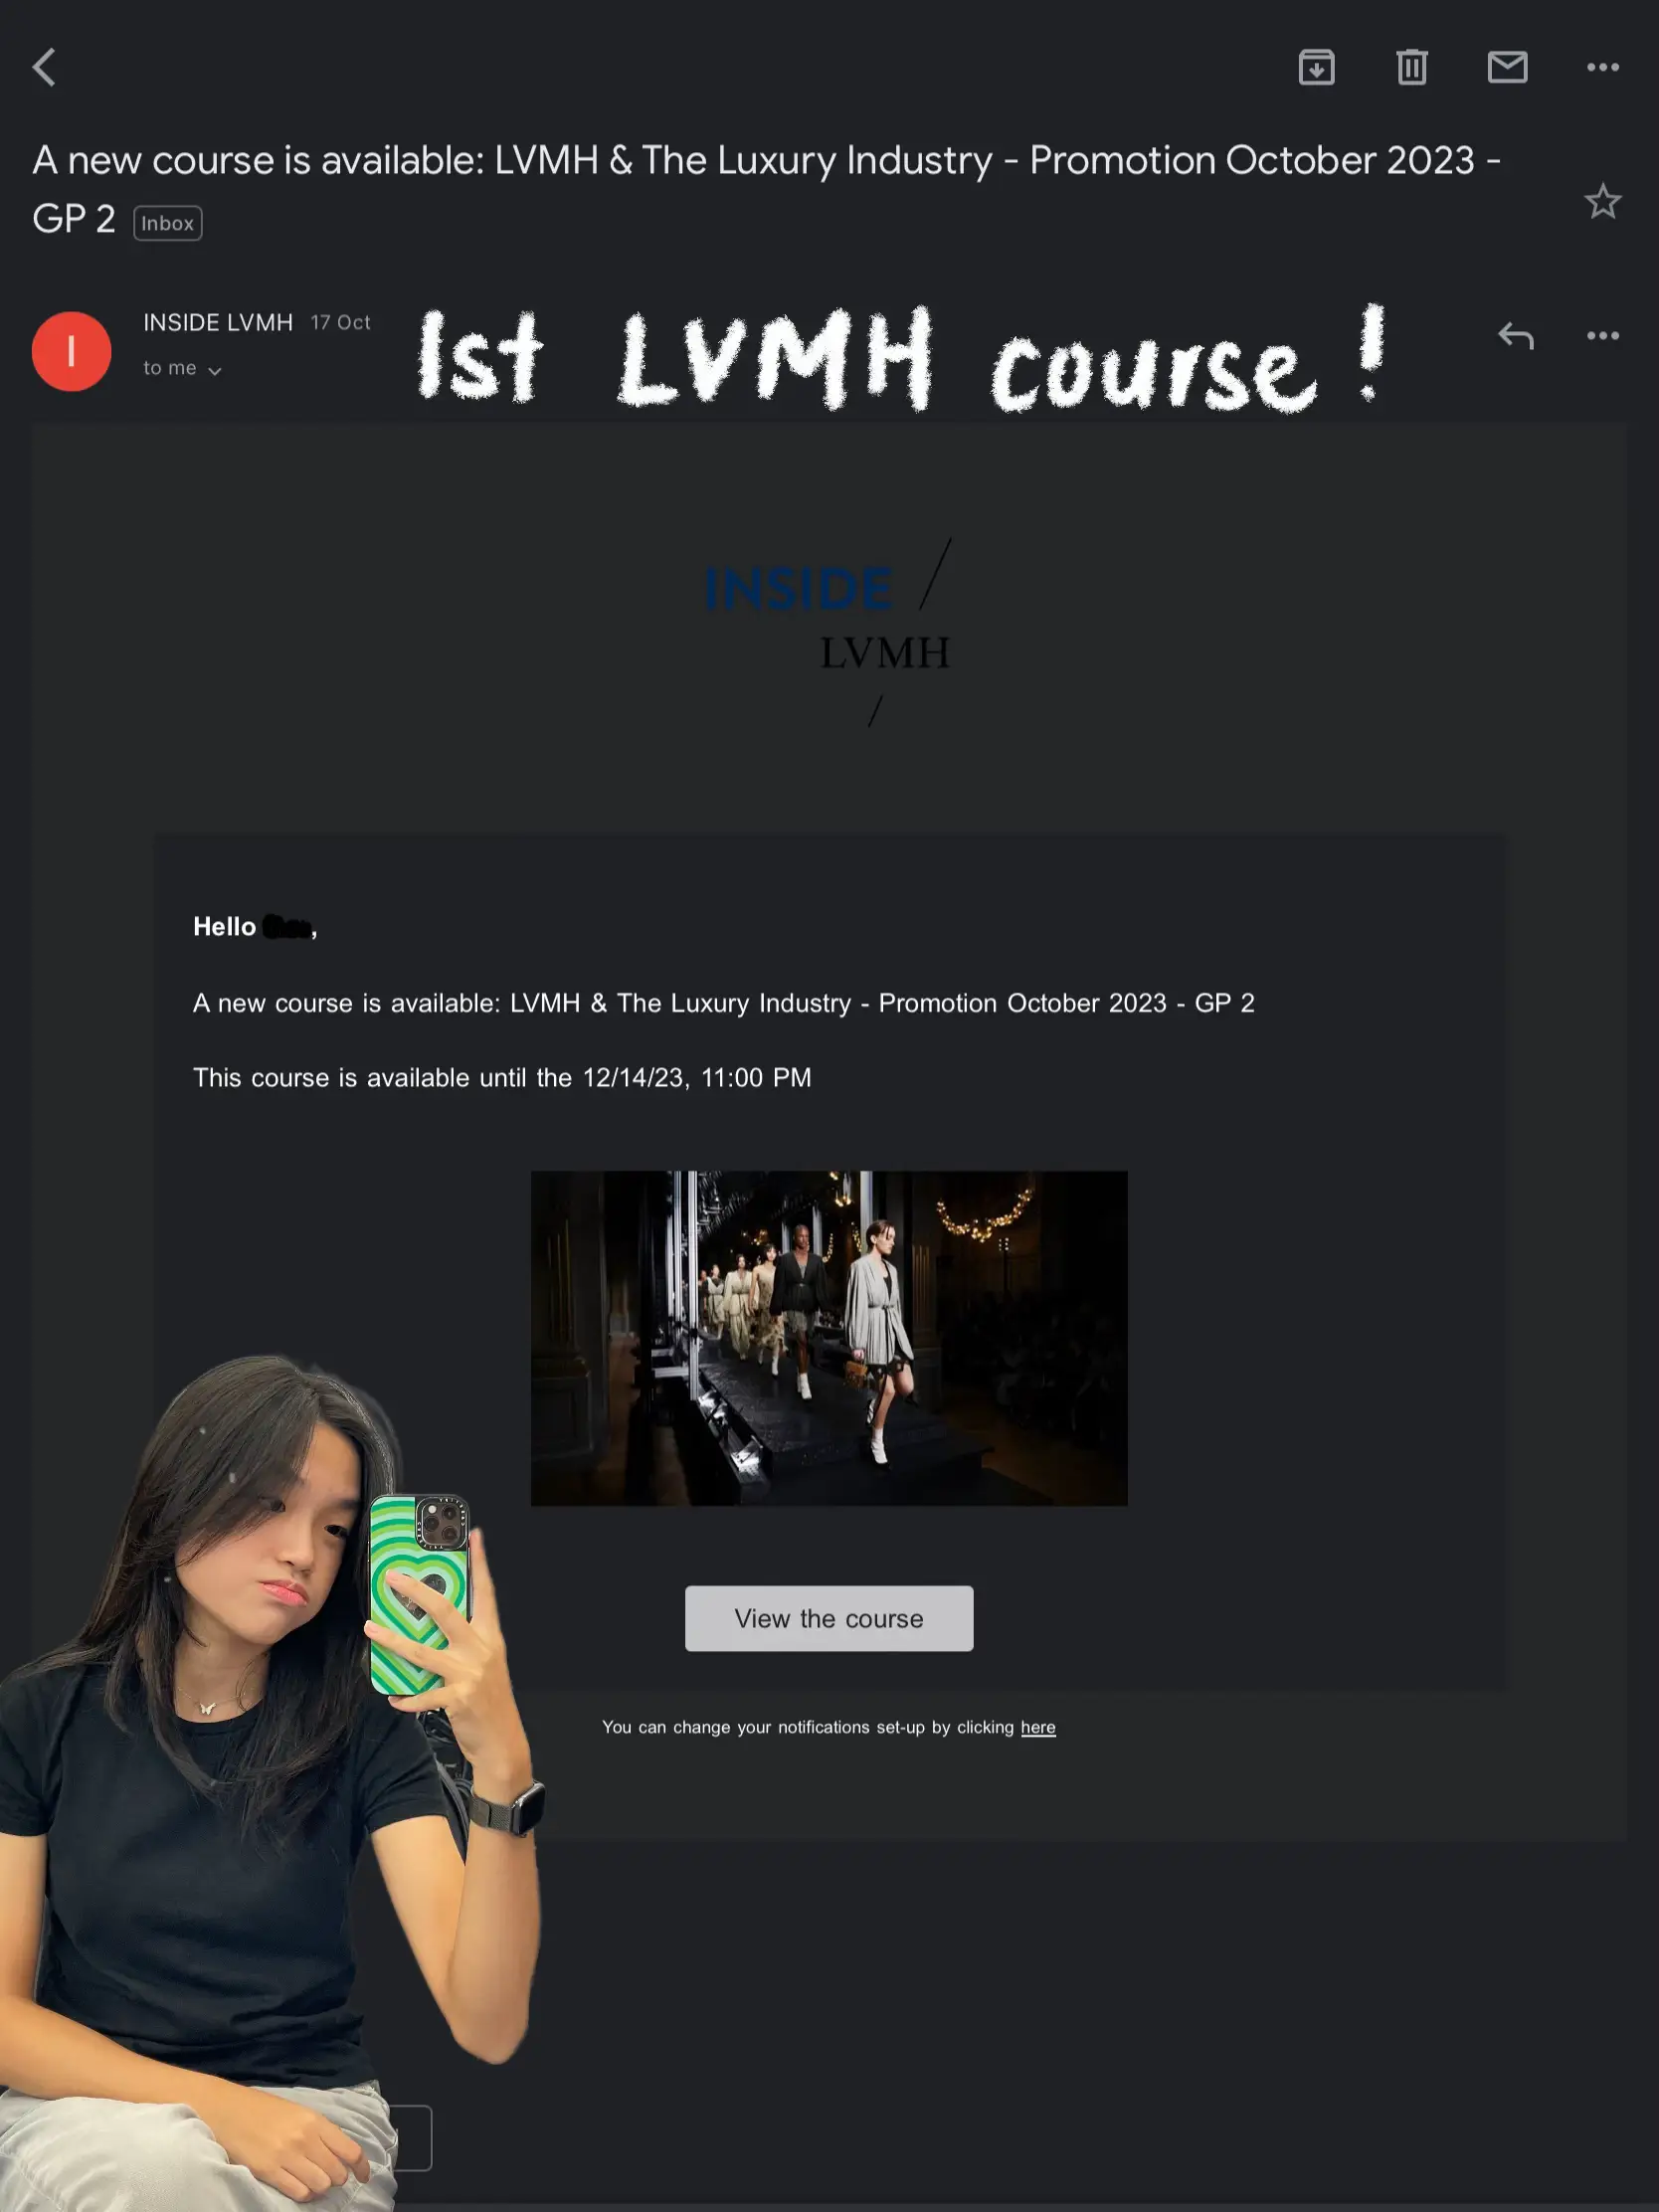 1ST LVMH course is UP! 👆💗, Gallery posted by kerker 🩷